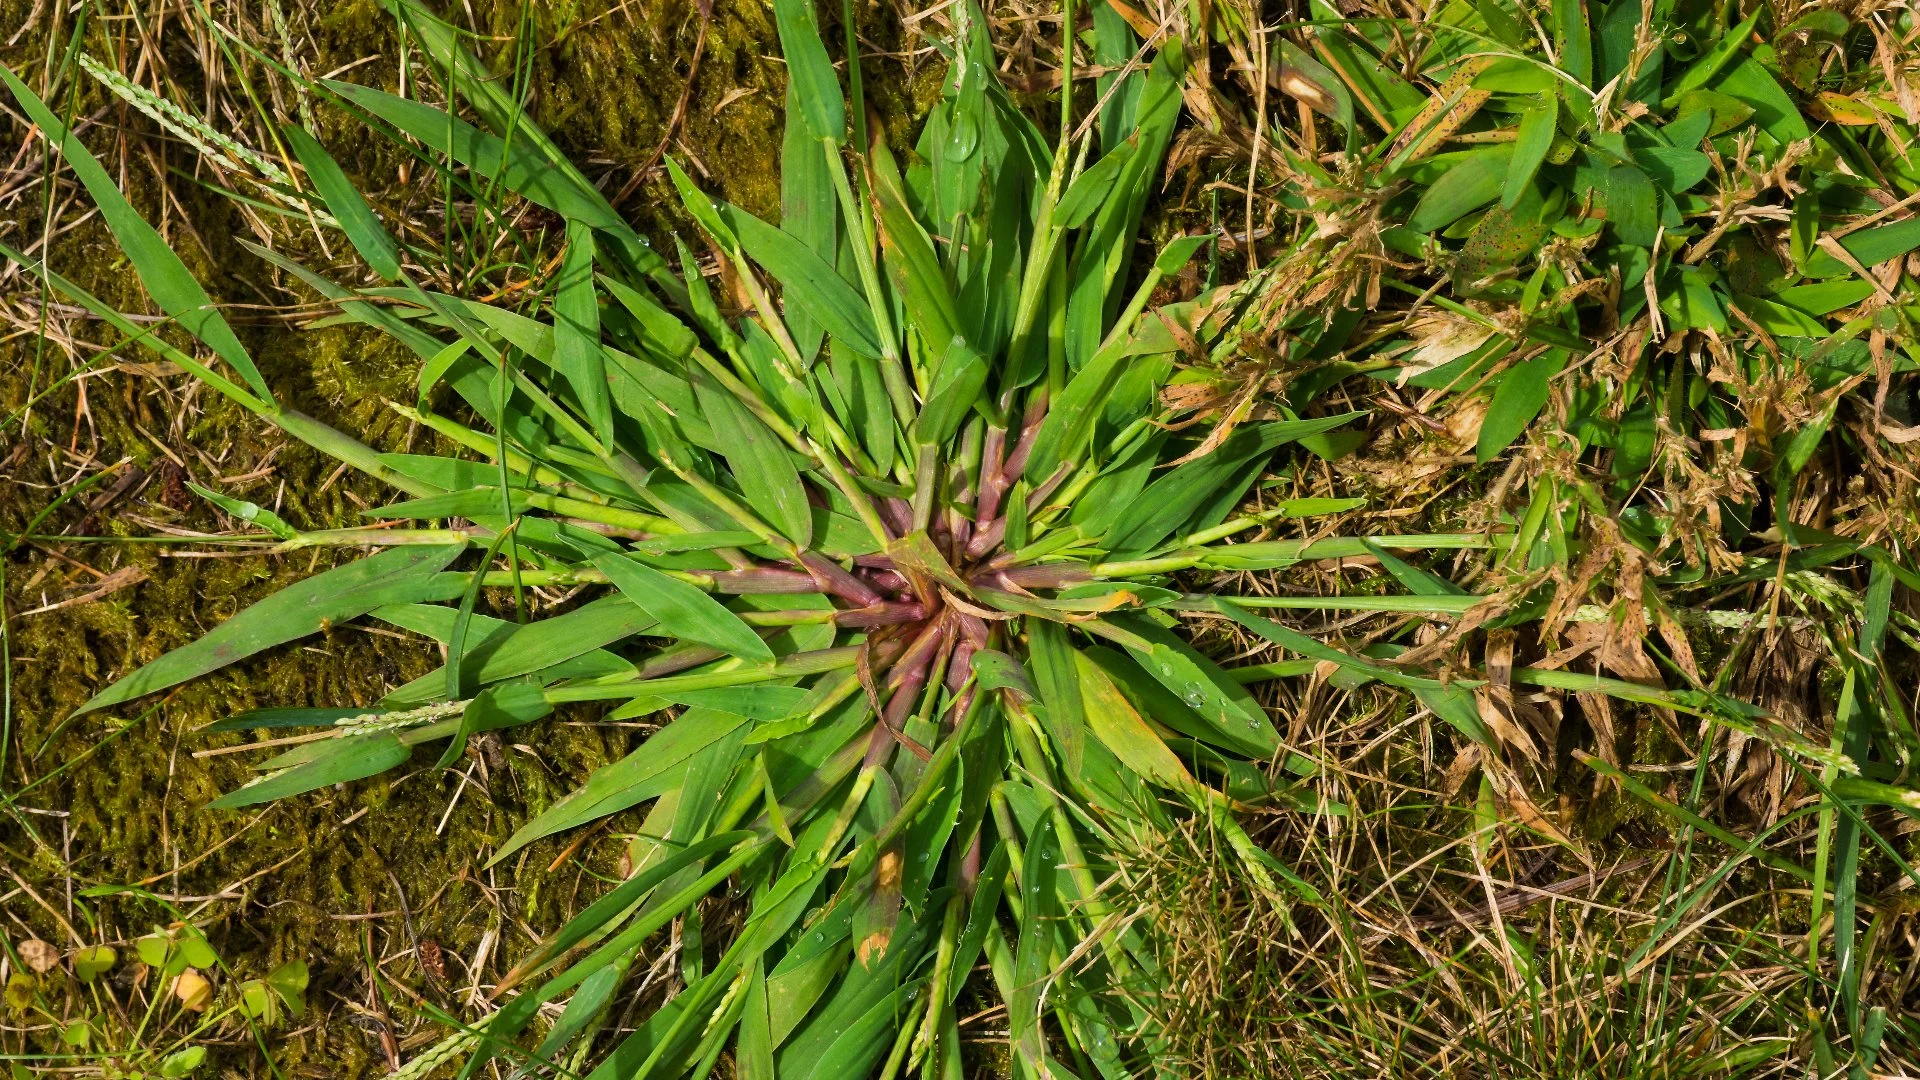 Crabgrass - How to Deal With This Invasive Weed!